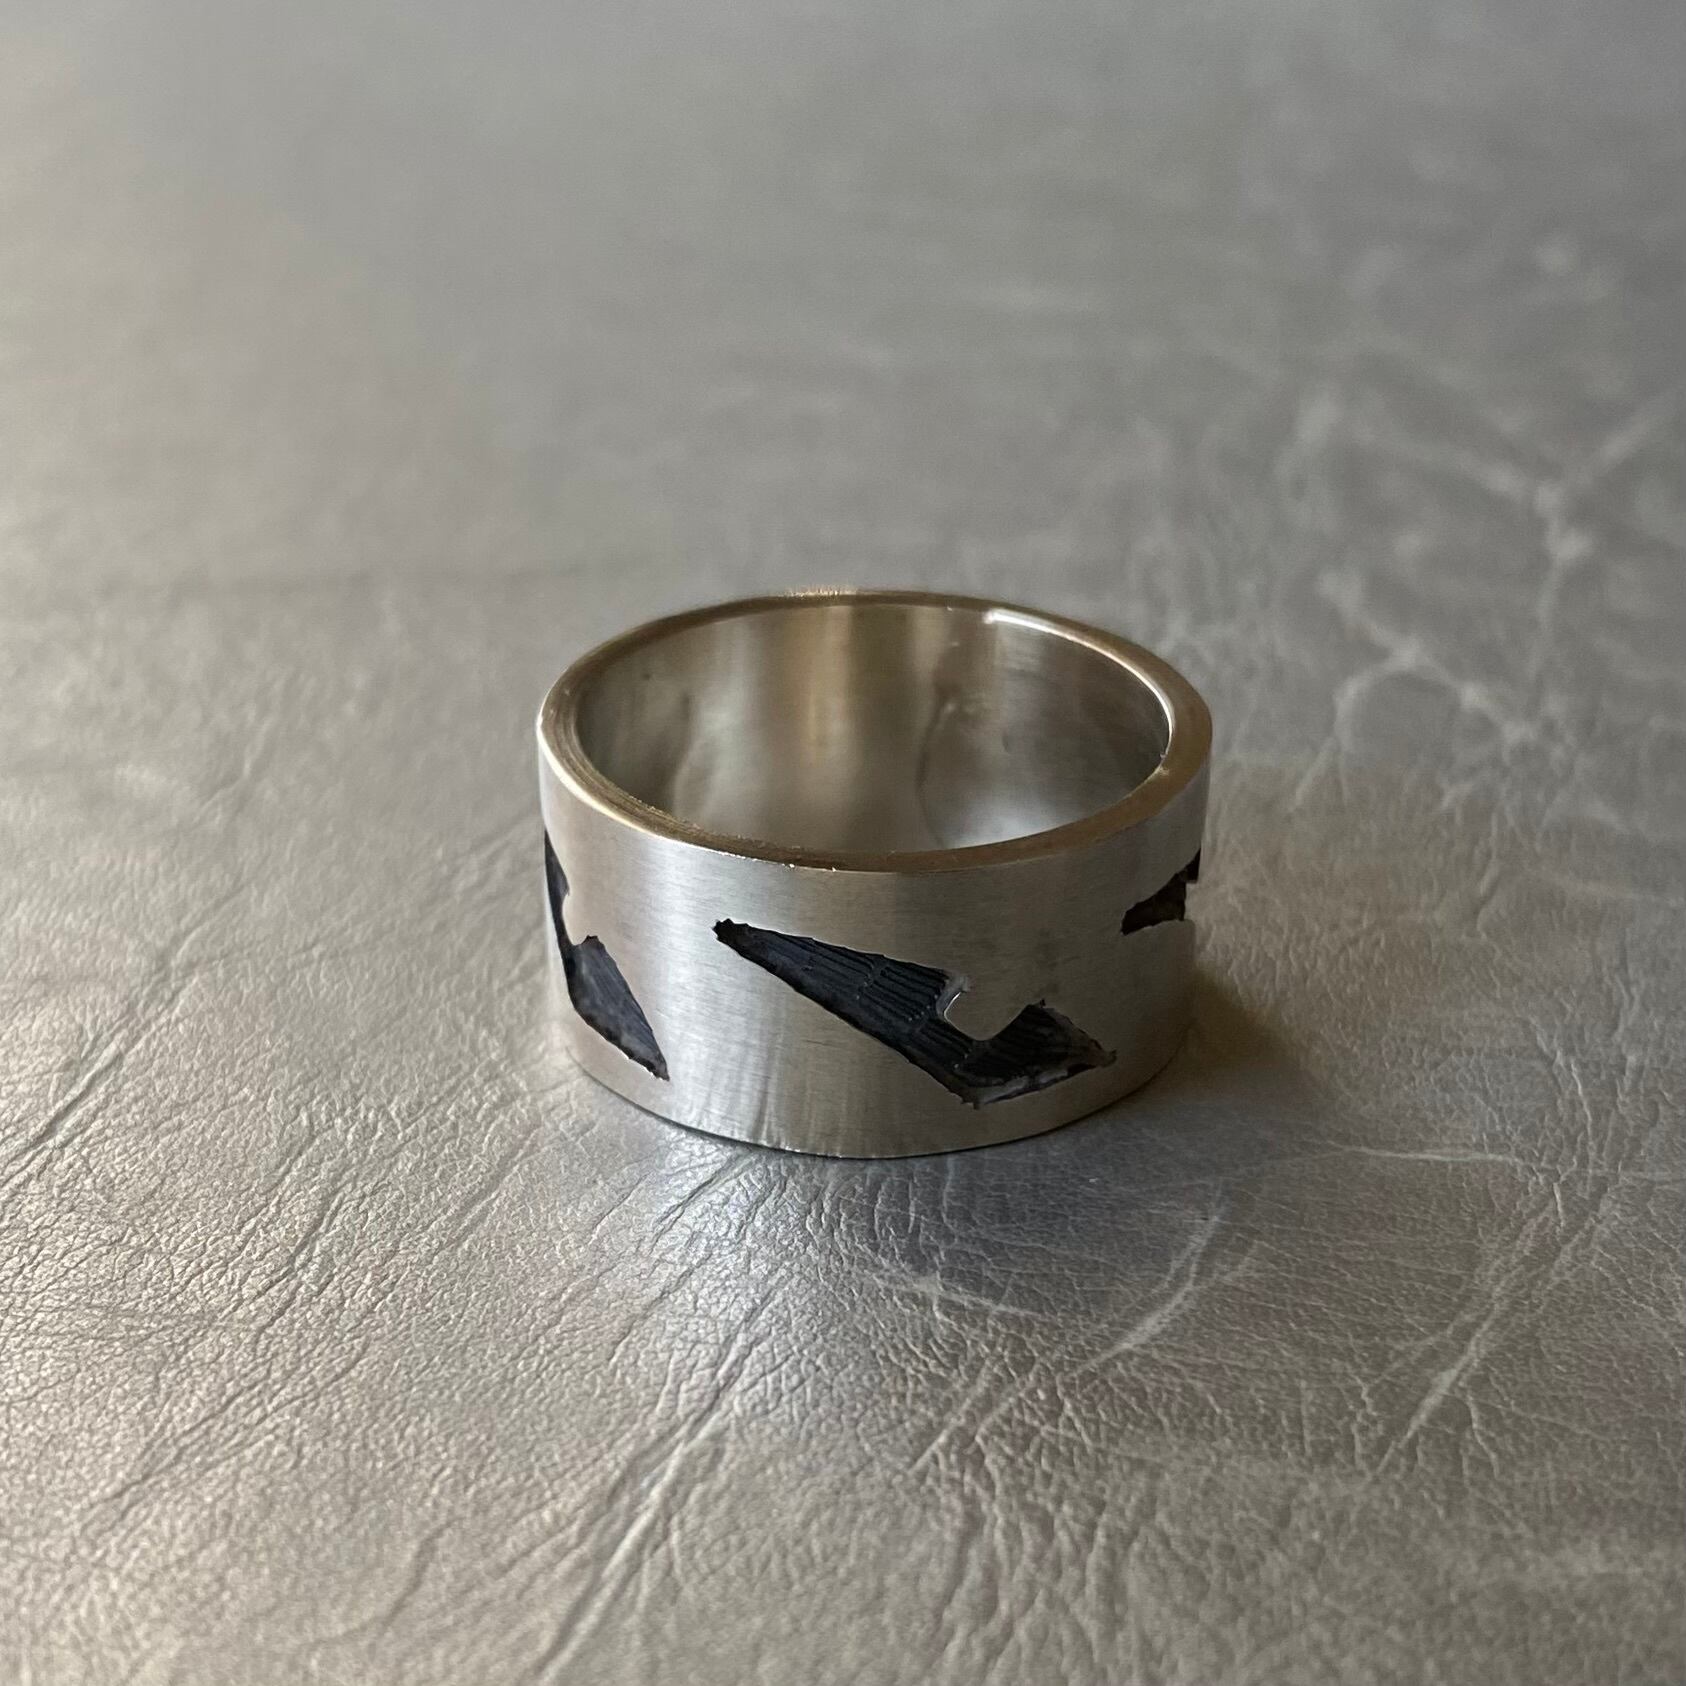 Vintage 80s USA Mexico silver 925 design mens ring アメリカ